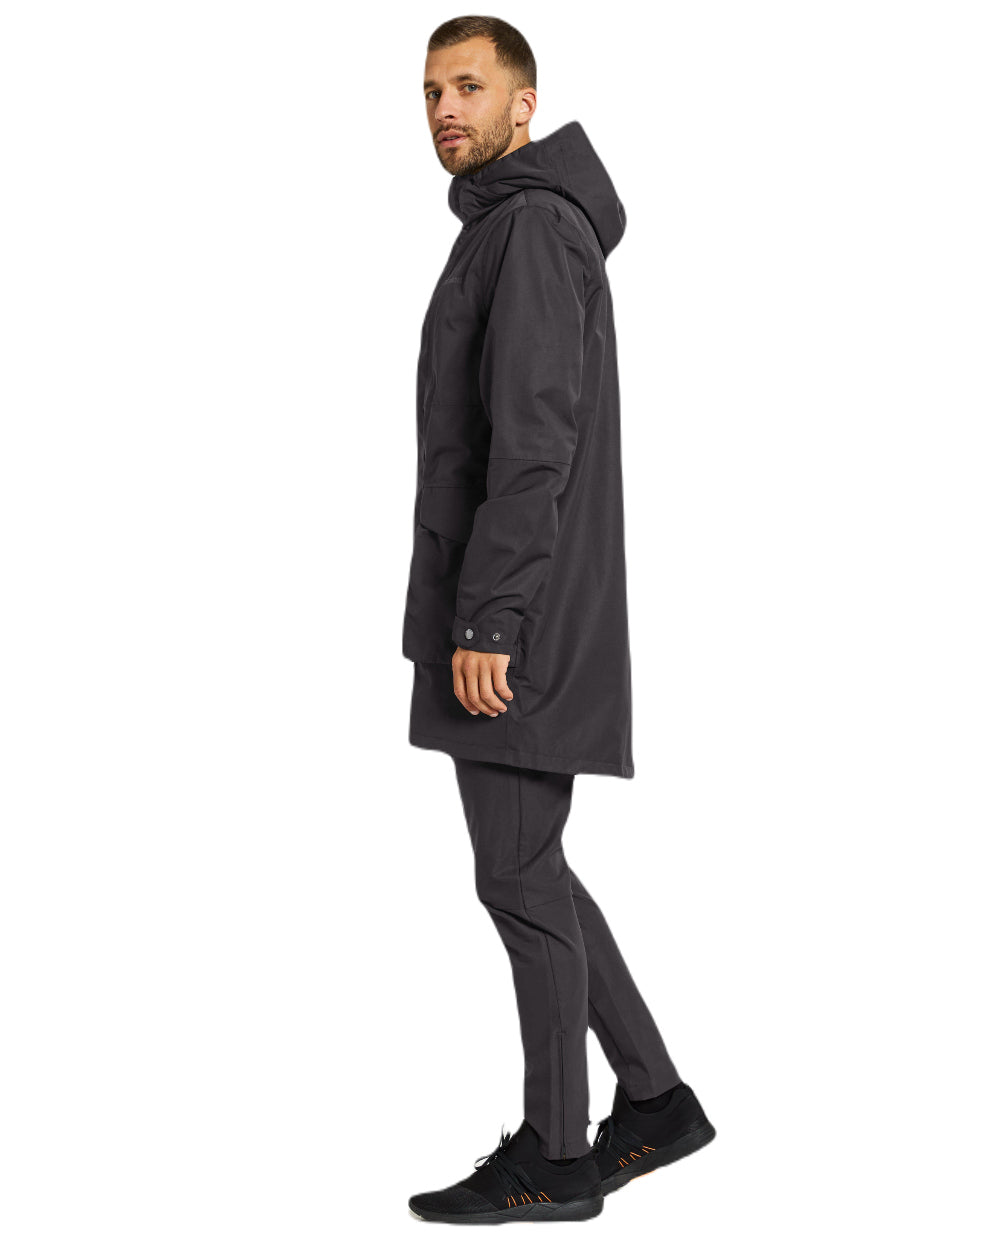 Black Coloured Didriksons Andreas Unisex Parka 2 On A White Background 